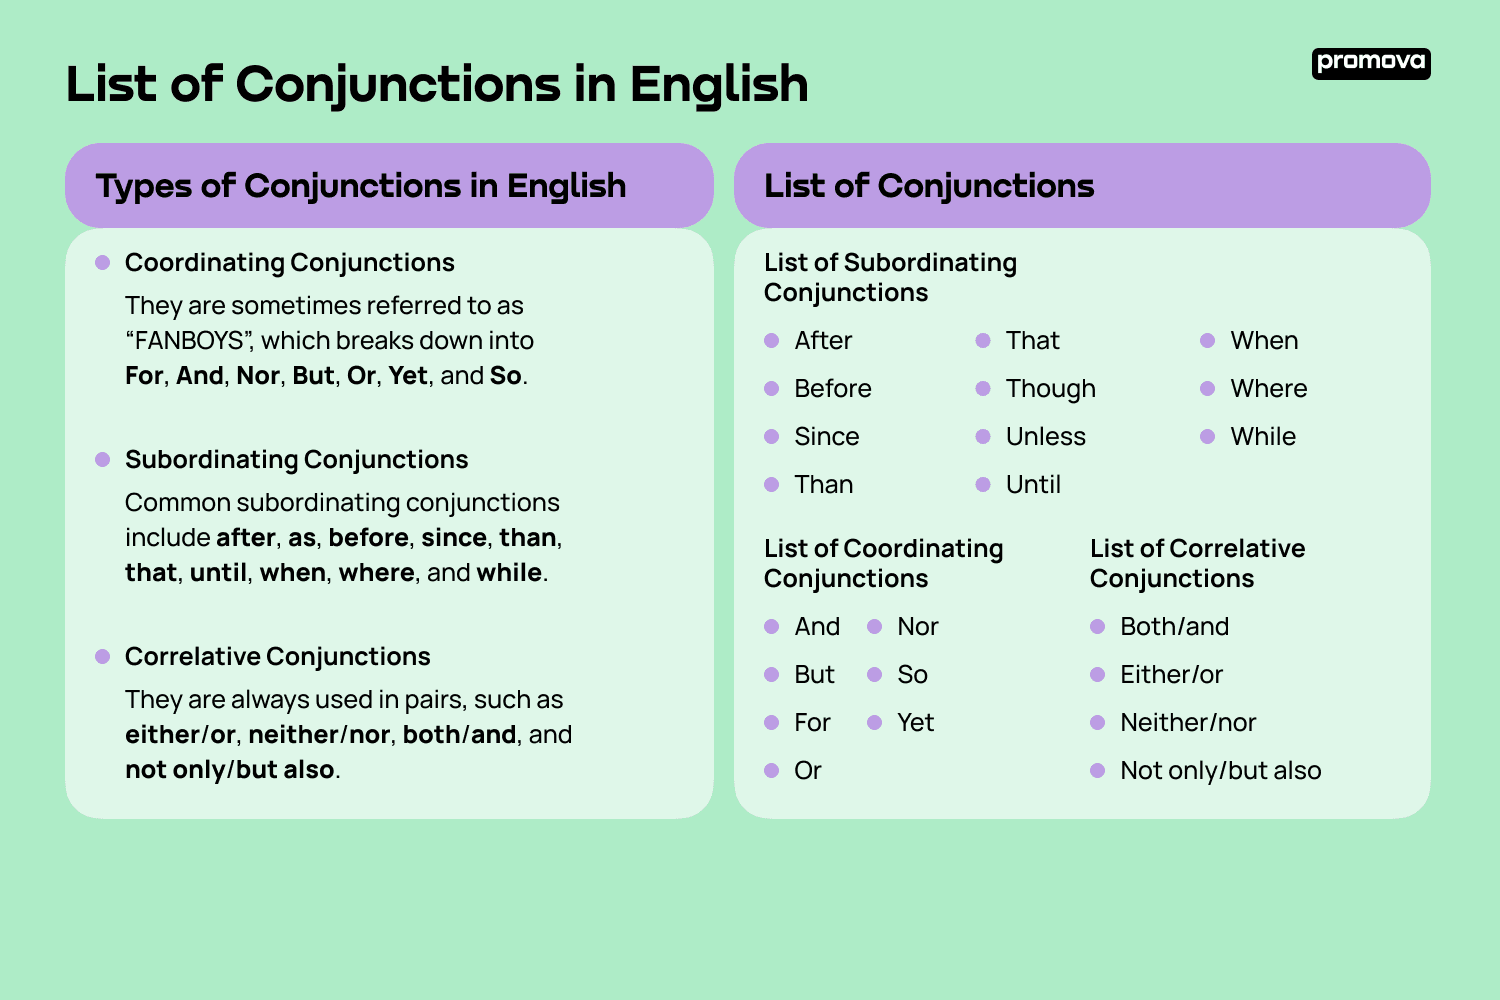 List of Conjunctions in English